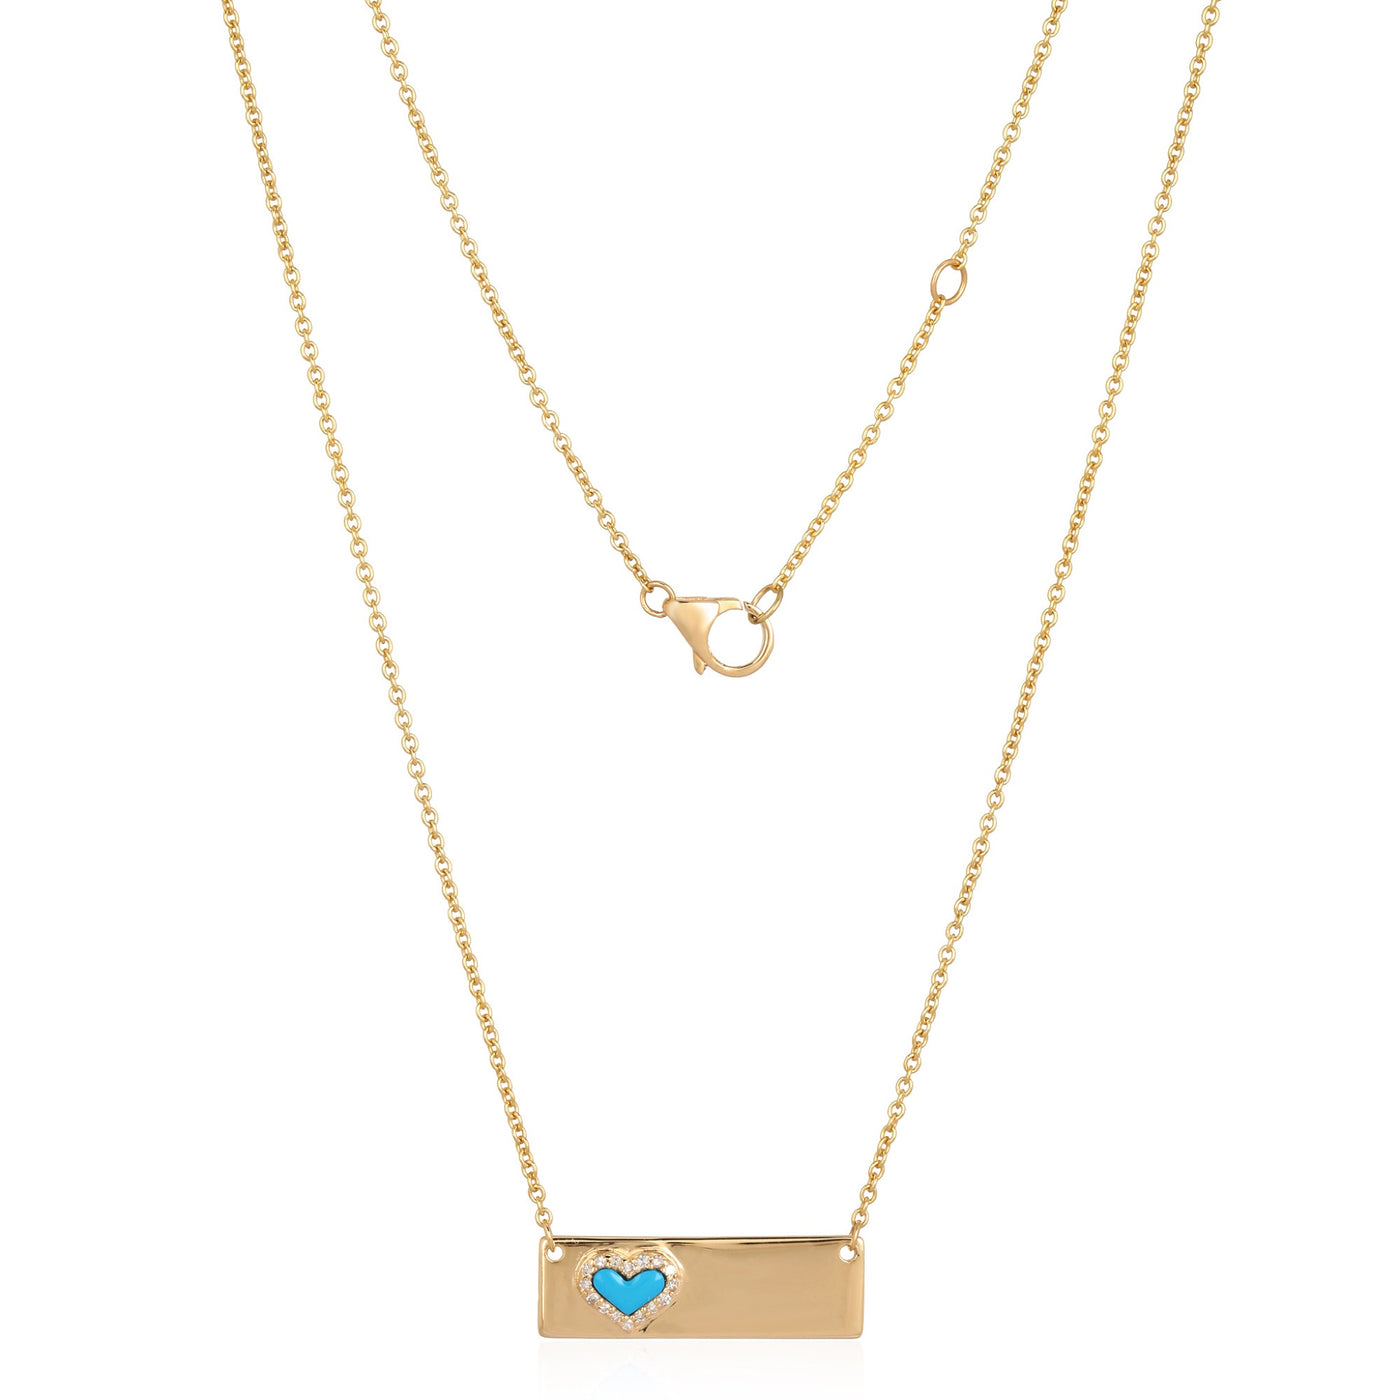 Turquoise & Pave Diamond Heart Bar Necklace